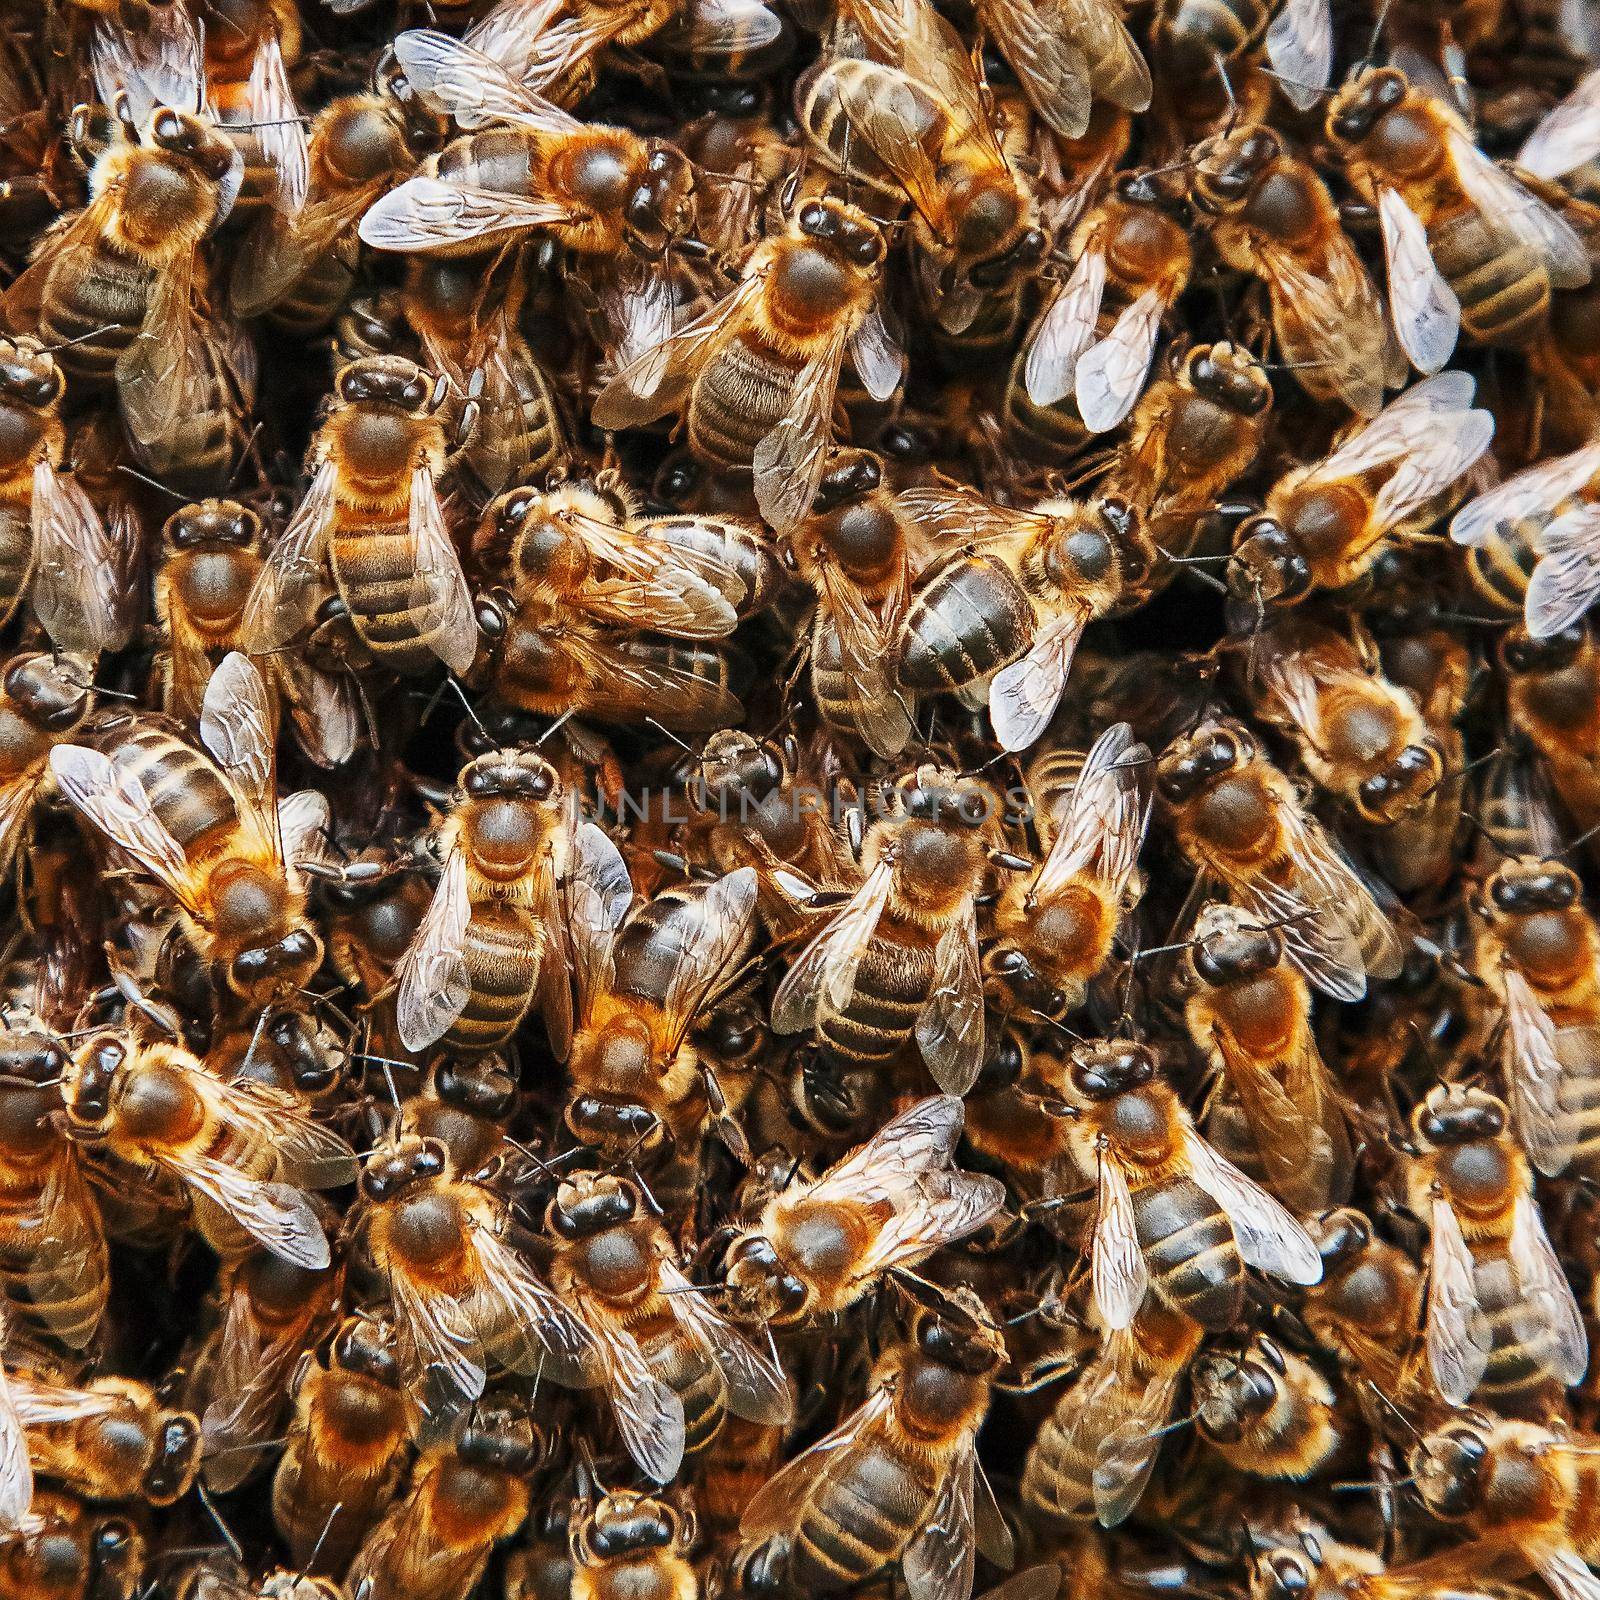 A swarm of bees on the hive. Many bees in the form of texture close-up. Macro, background